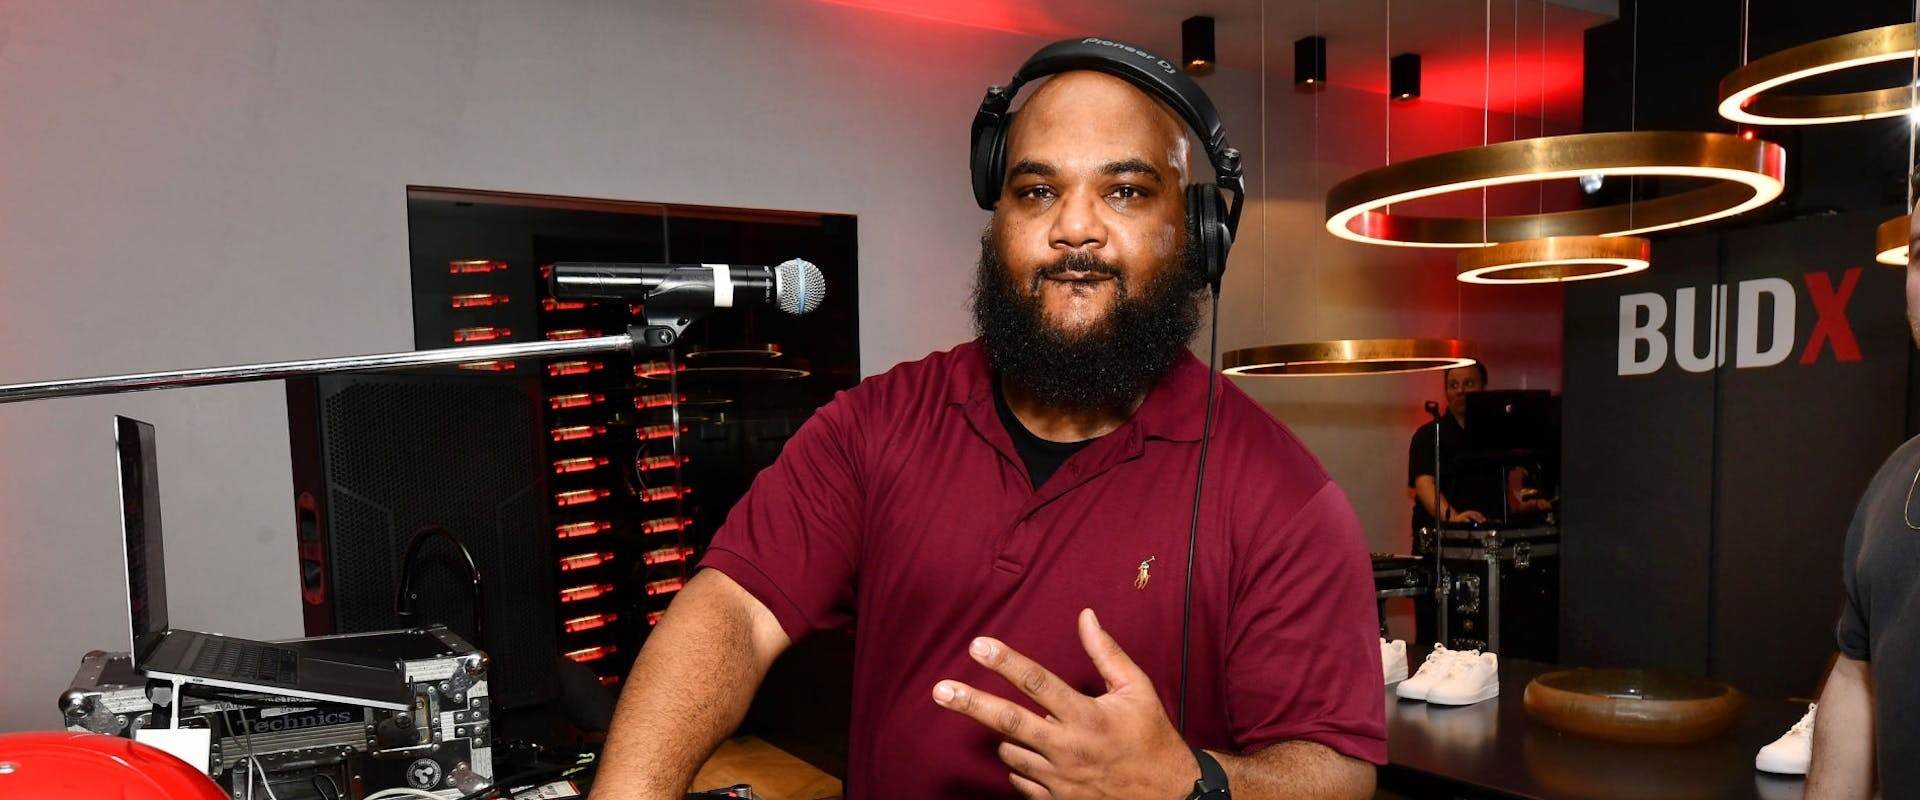 Maseo of De La Soul performs at Night One of BUDX Miami by Budweiser on January 31, 2020 in Miami, Florida. 